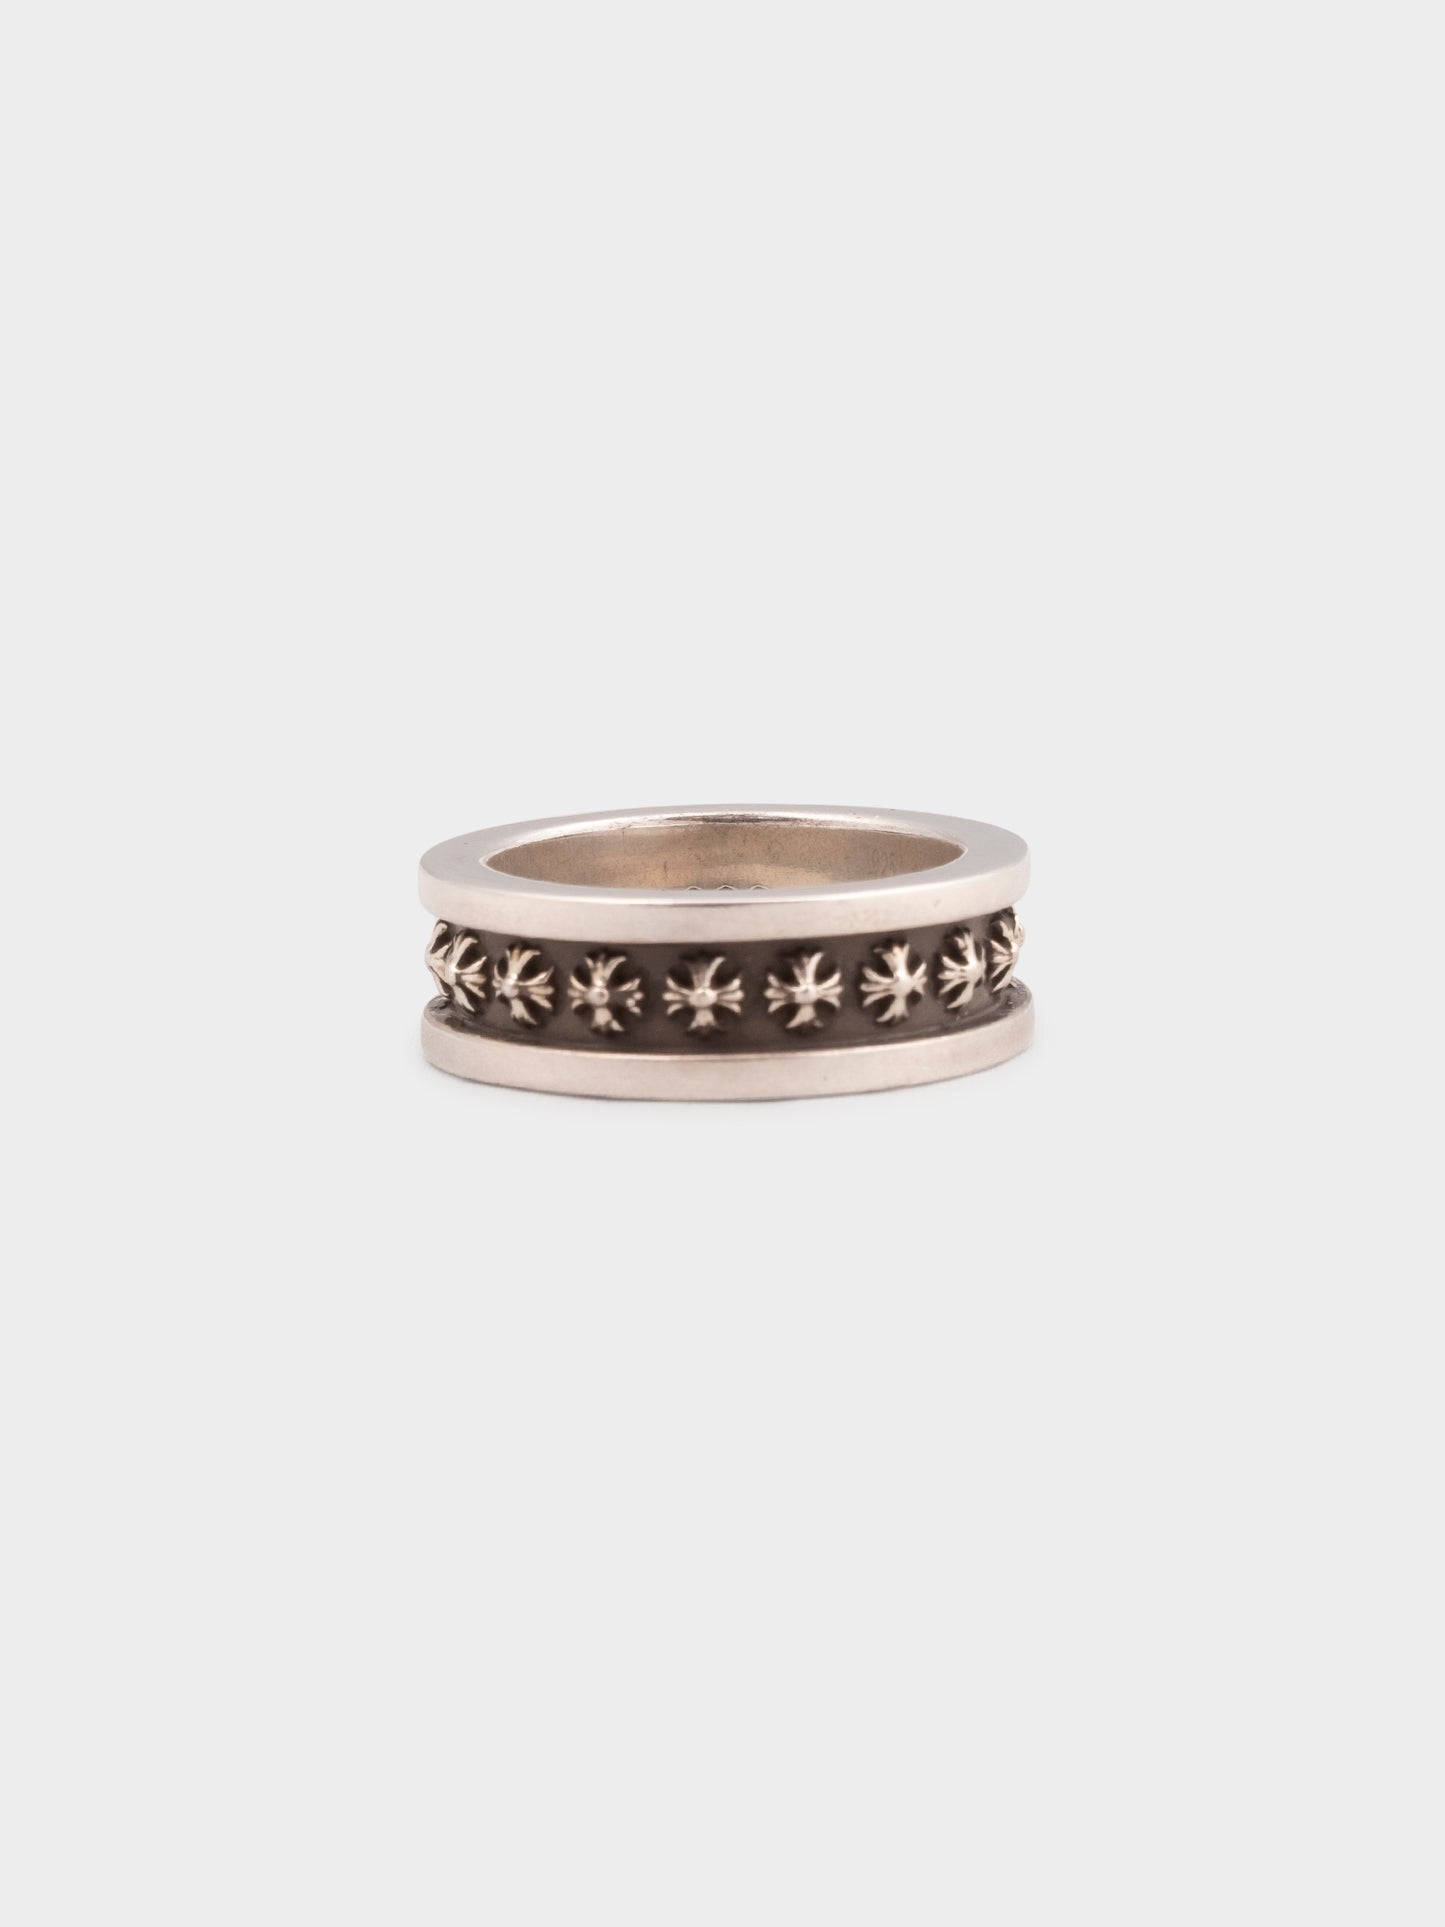 Buy Chrome Hearts Mini Plus Ring Online at Groupie